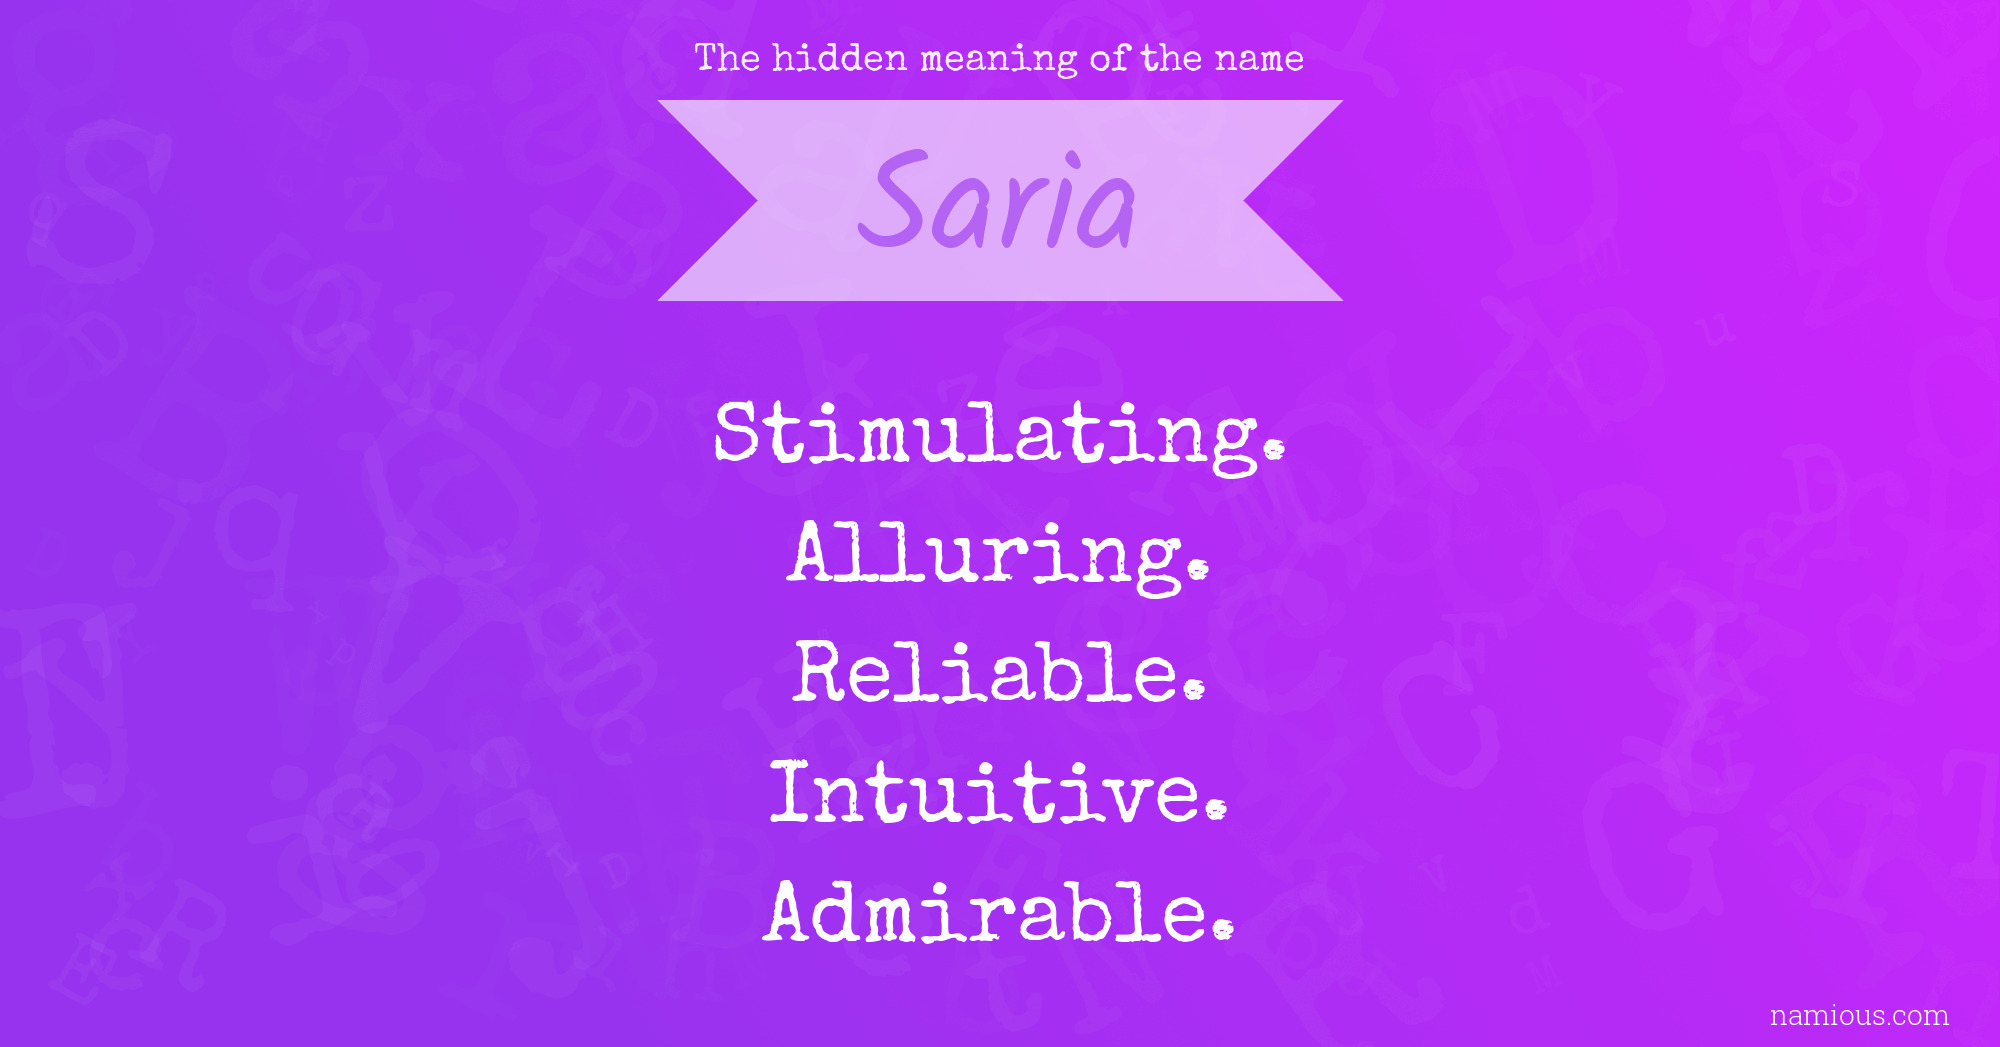 The hidden meaning of the name Saria